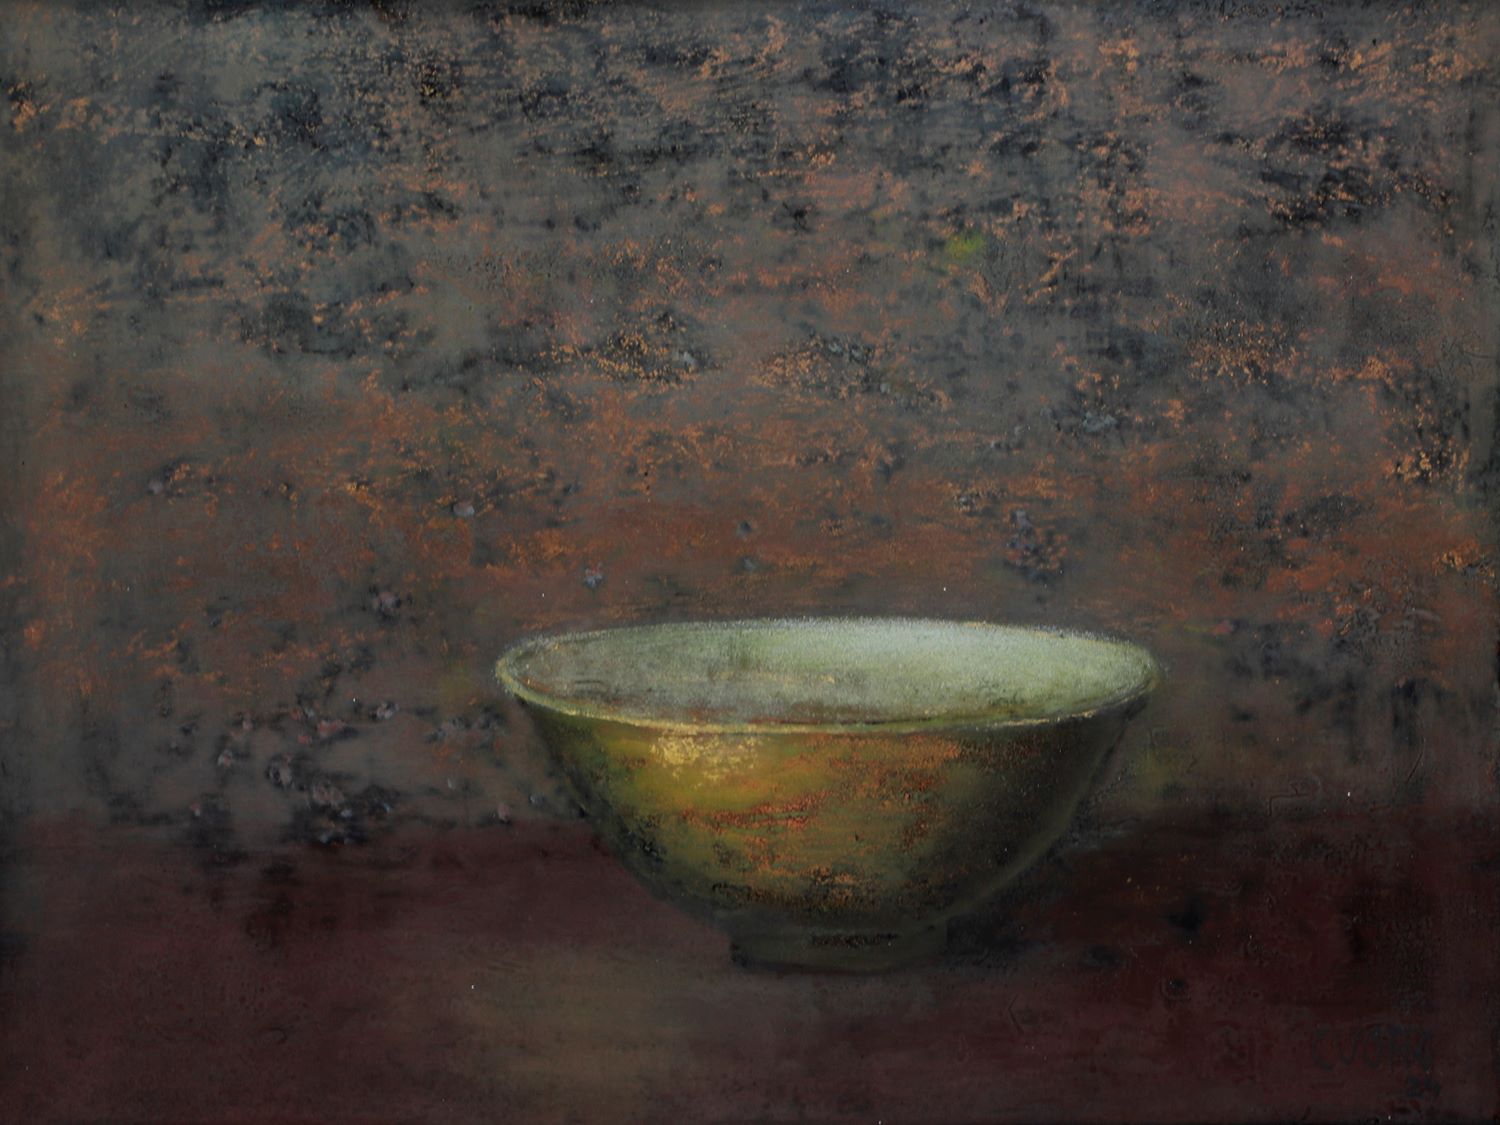 Old Bowl 43 - Vietnamese Lacquer Painting by Artist Nguyen Tuan Cuong